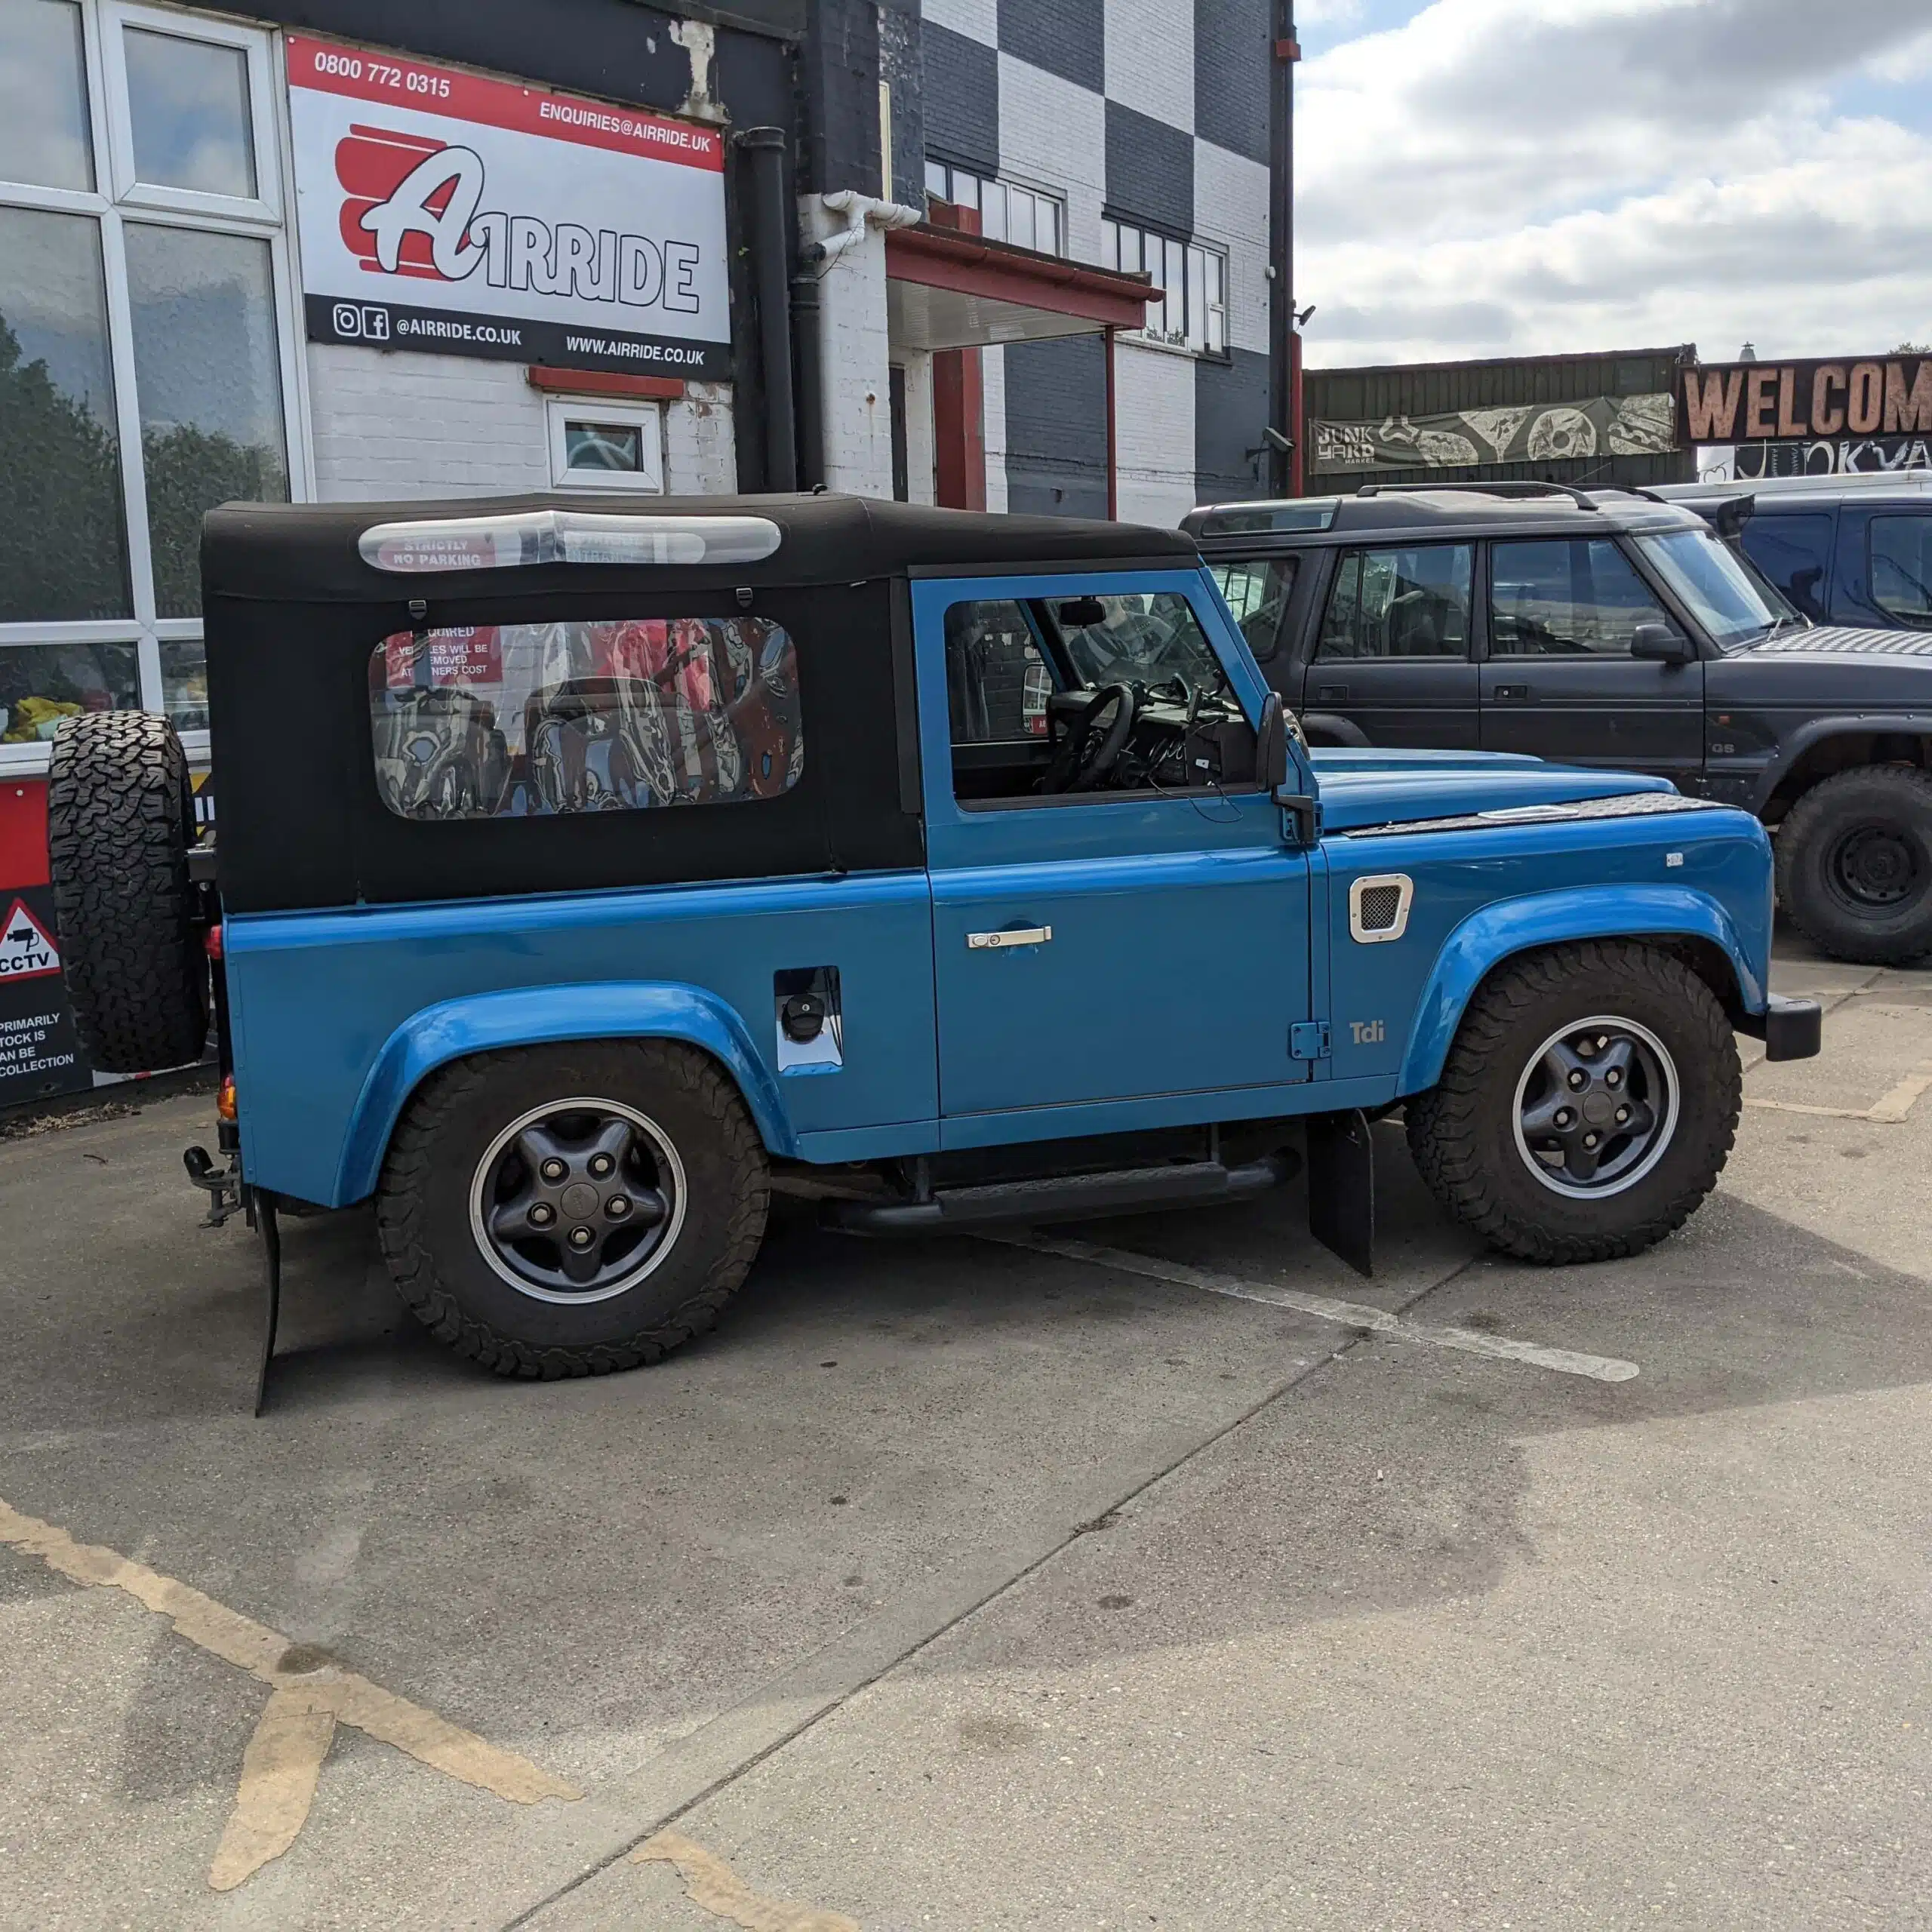 Lowered 1997 Defender shown parked outside AirRide